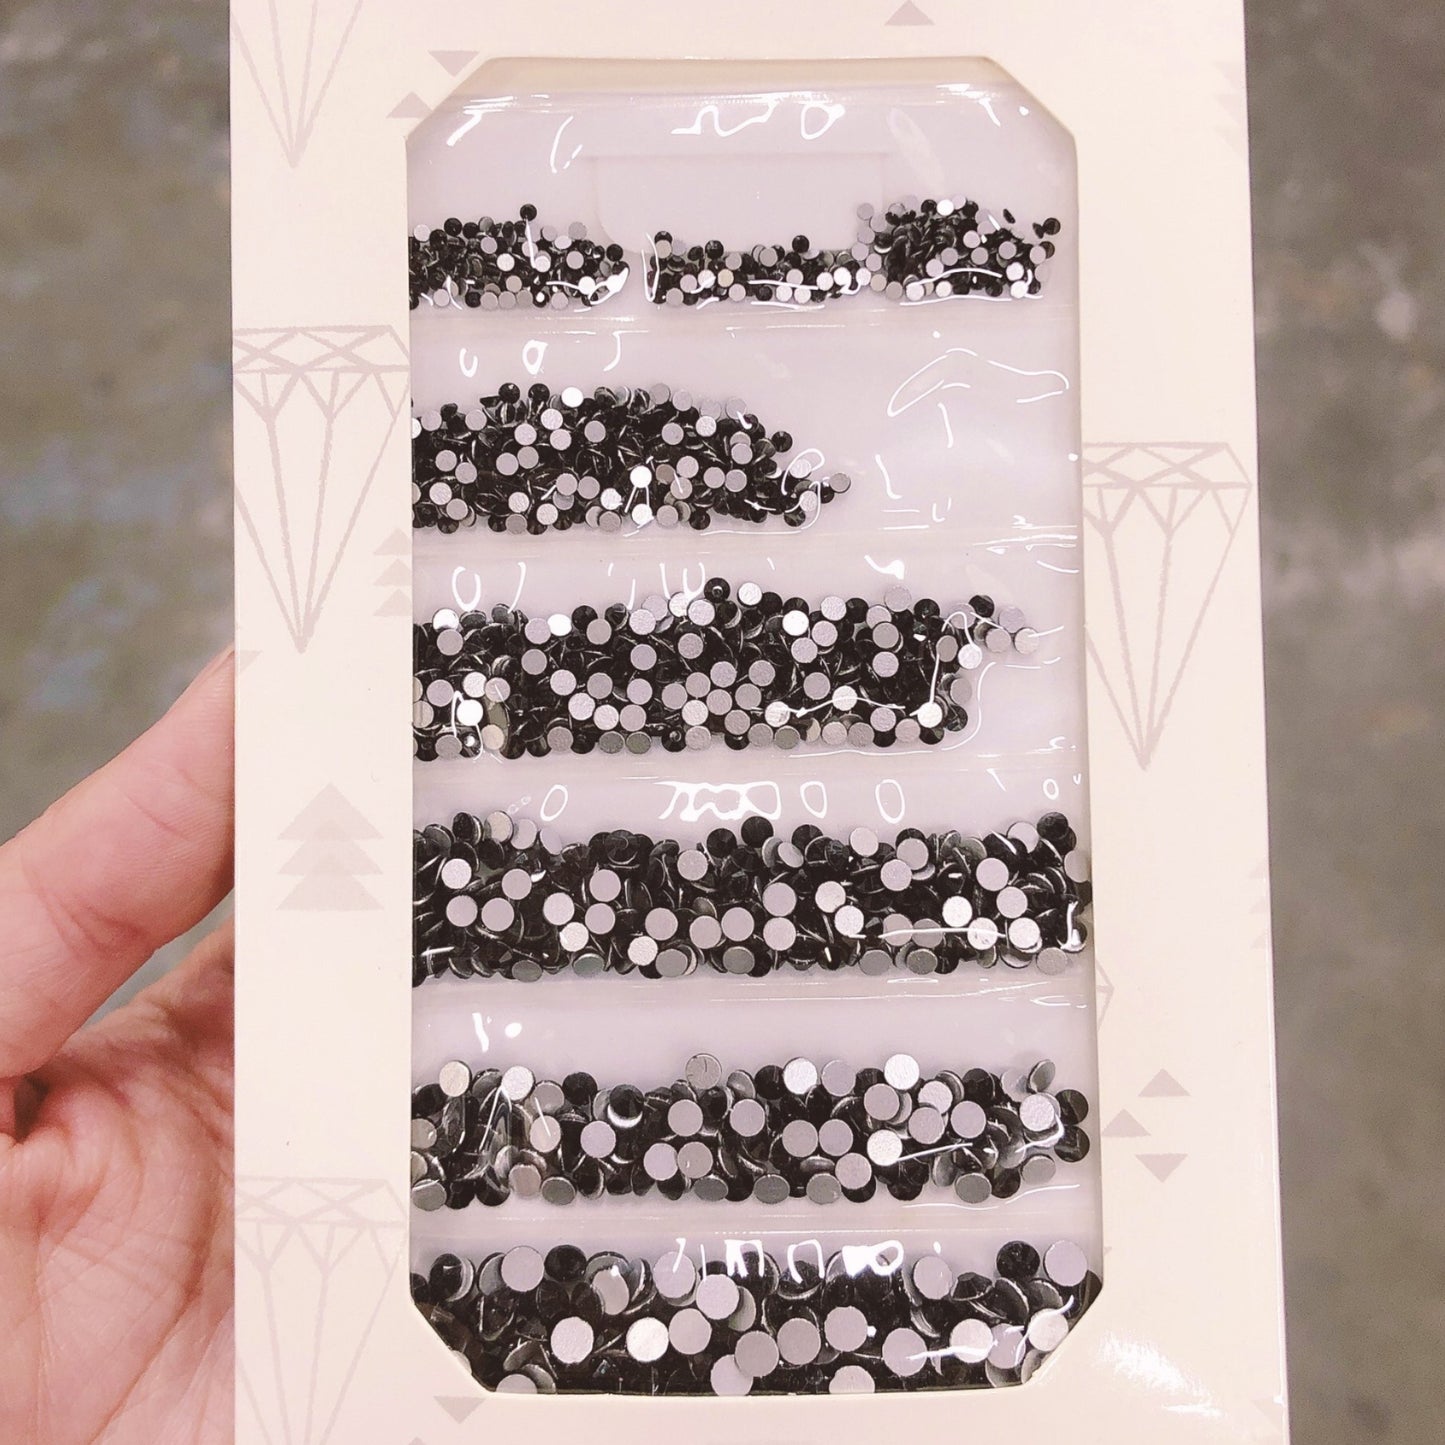 Crystal Flatback Mixed Size Nail Art Rhinestones - Black Approximately 1440pcs per bag of crystal round gems. Size: SS4 to SS14.